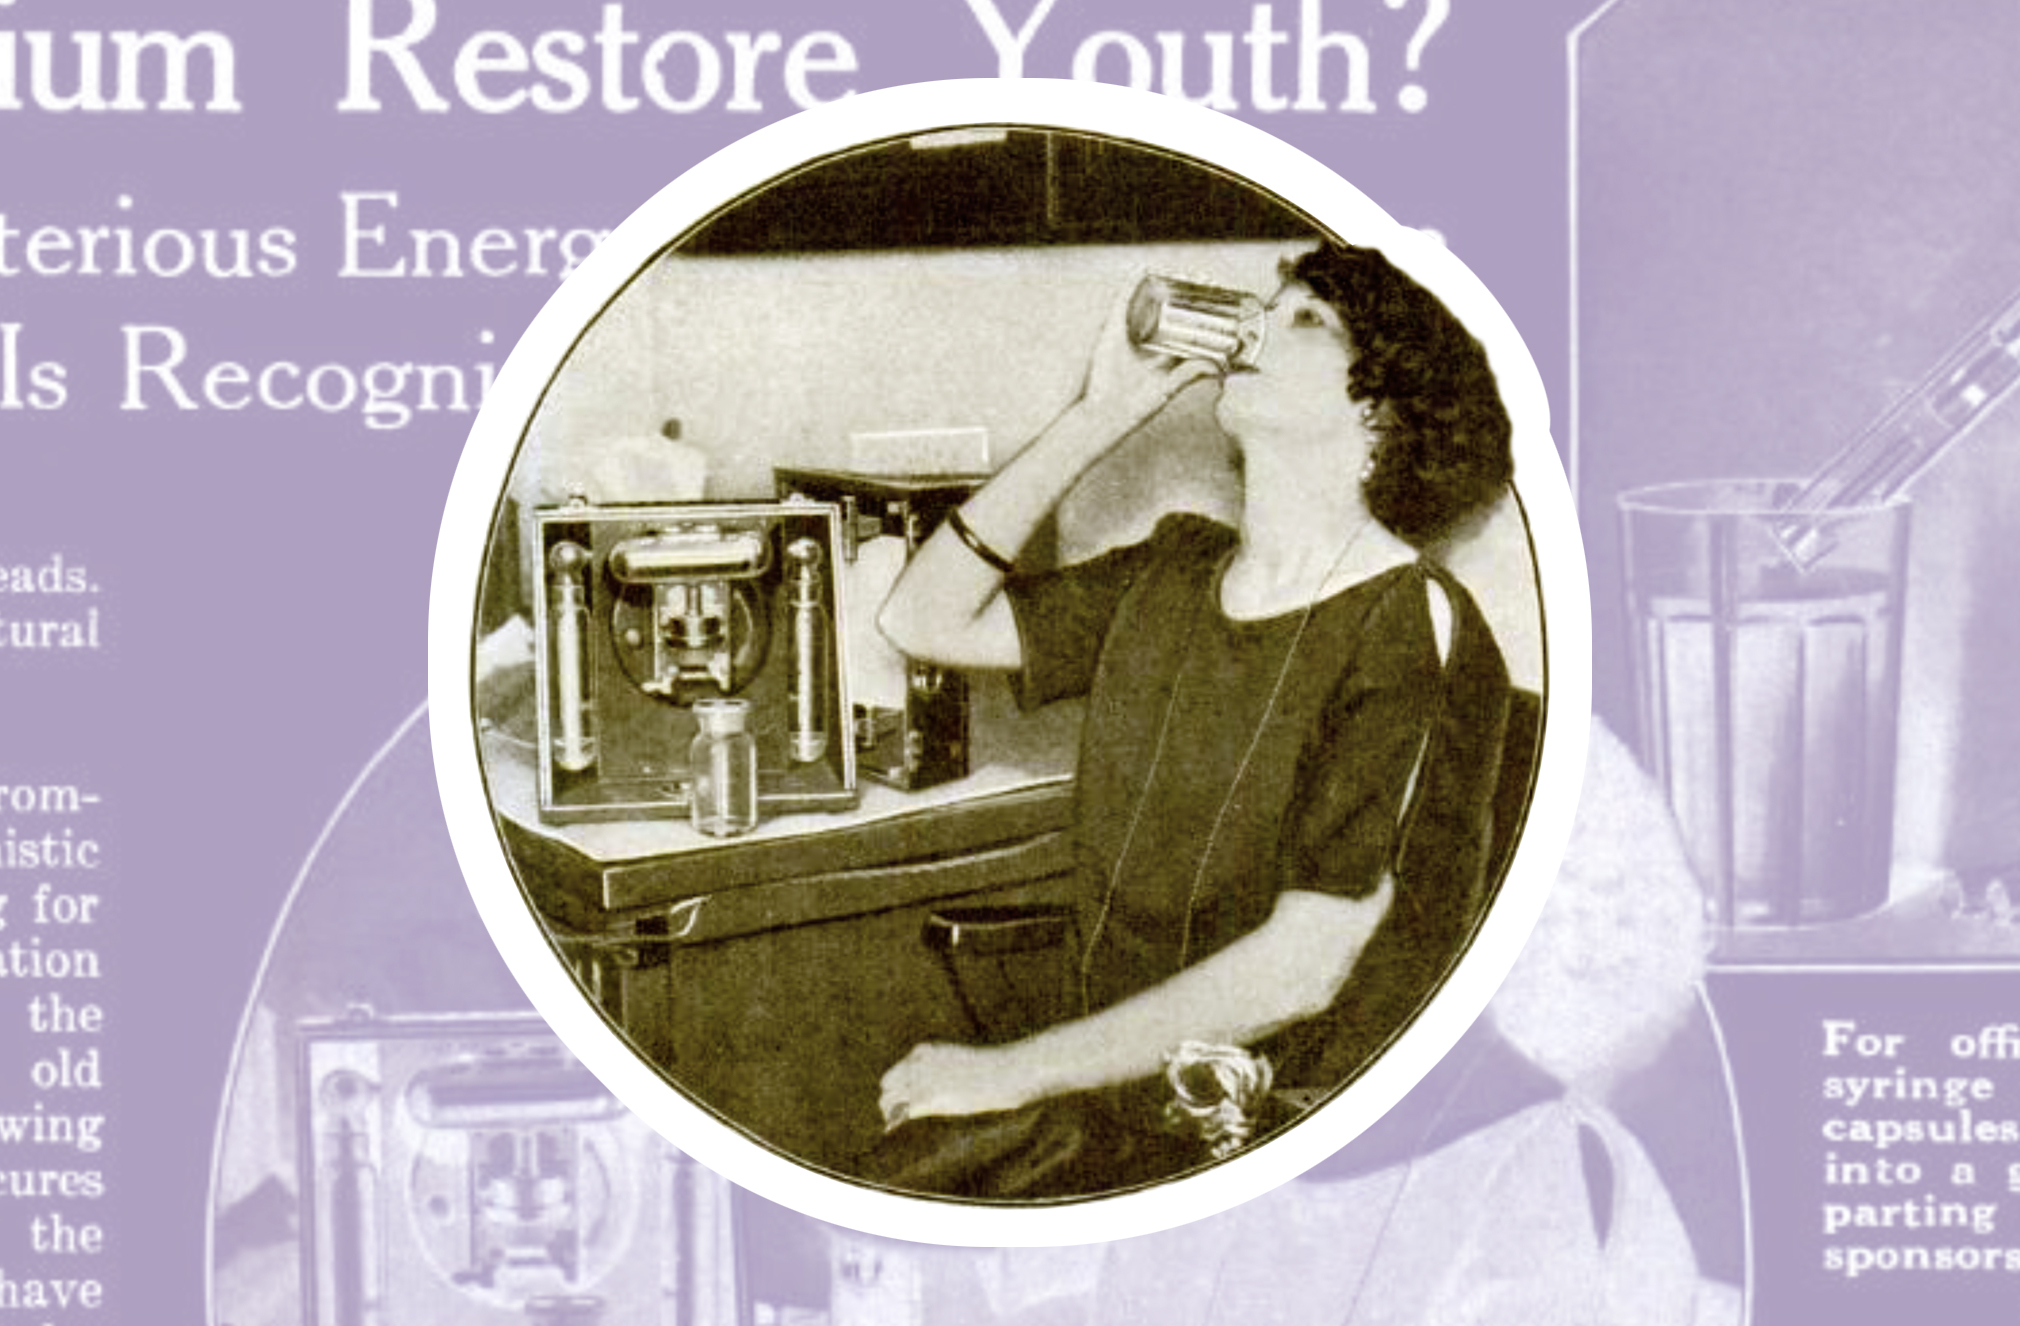 Images from 'Will radium restore youth?' that appeared in the June 1923 issue of Popular Science